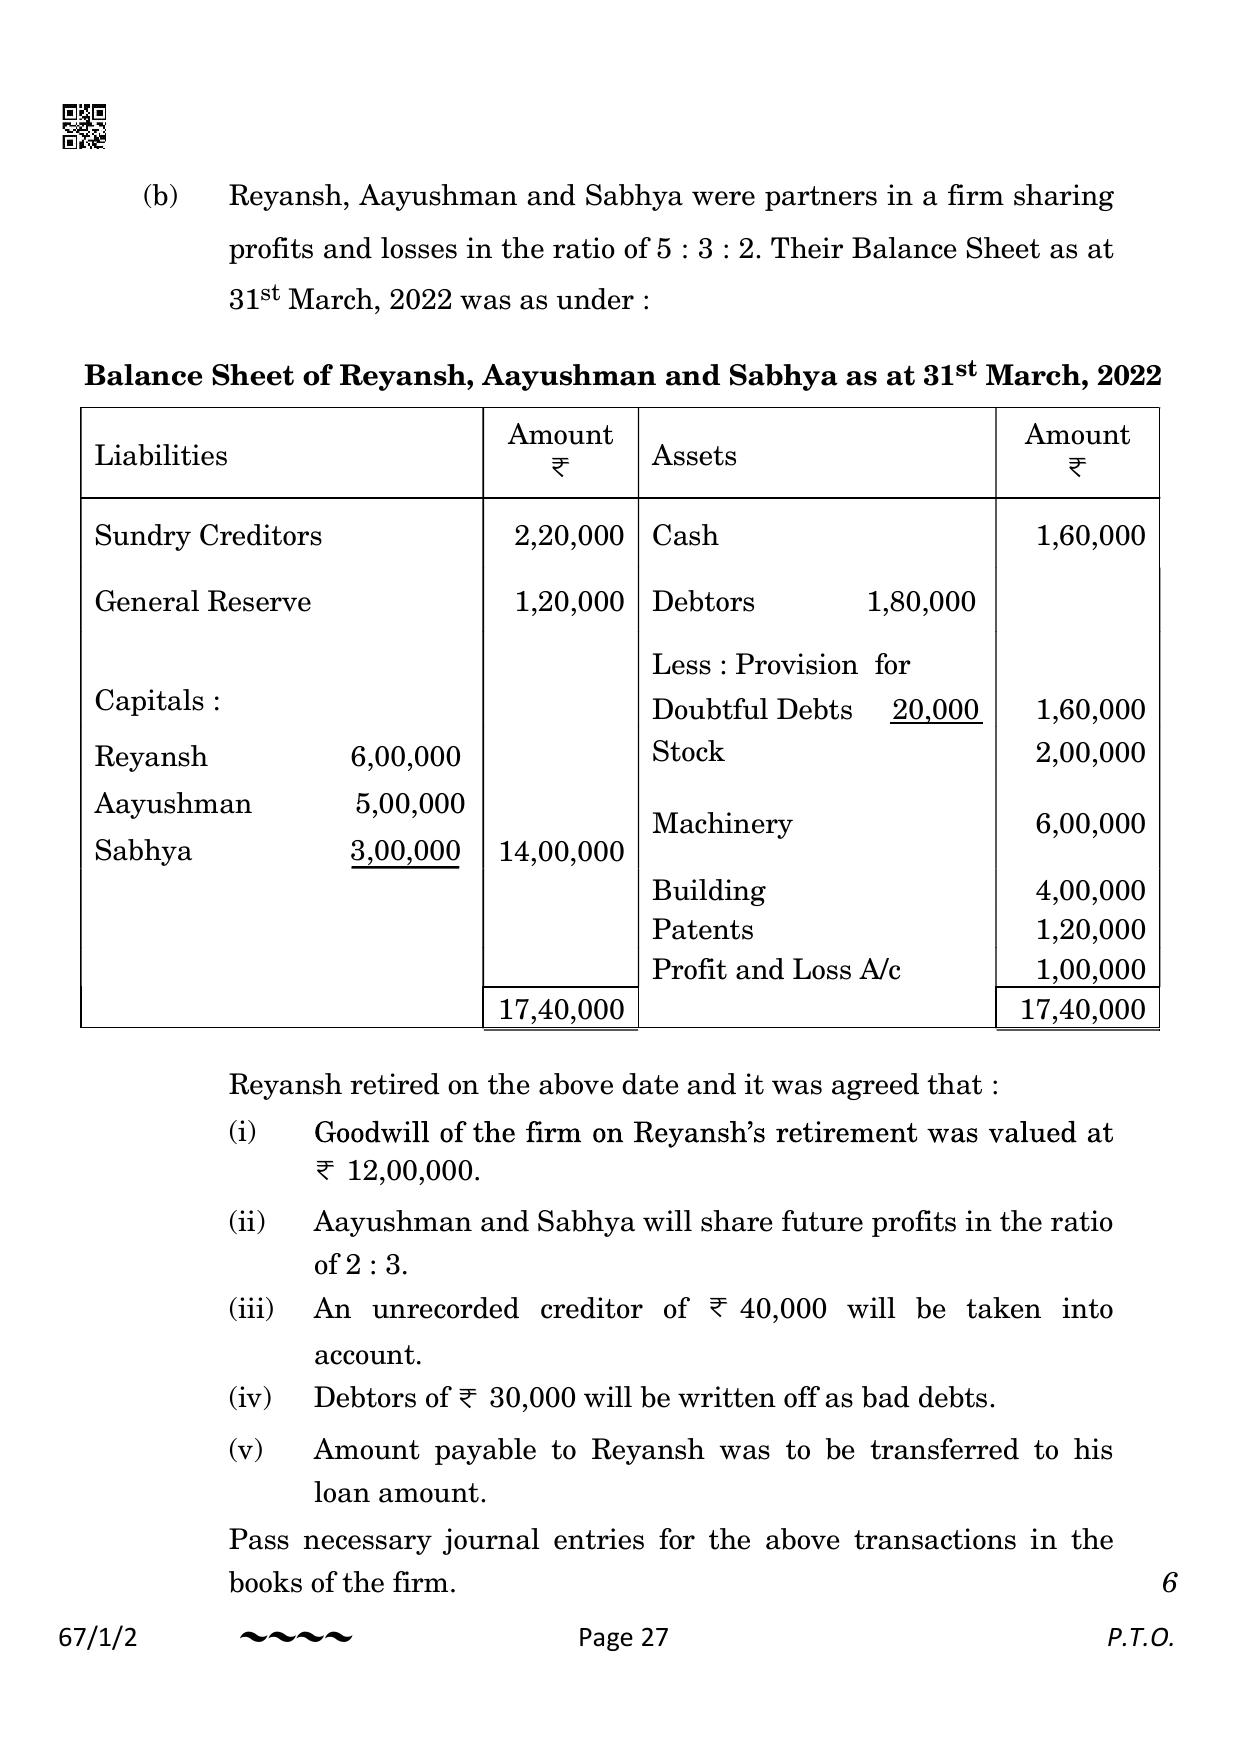 CBSE Class 12 67-1-2 Accountancy 2023 Question Paper - Page 27